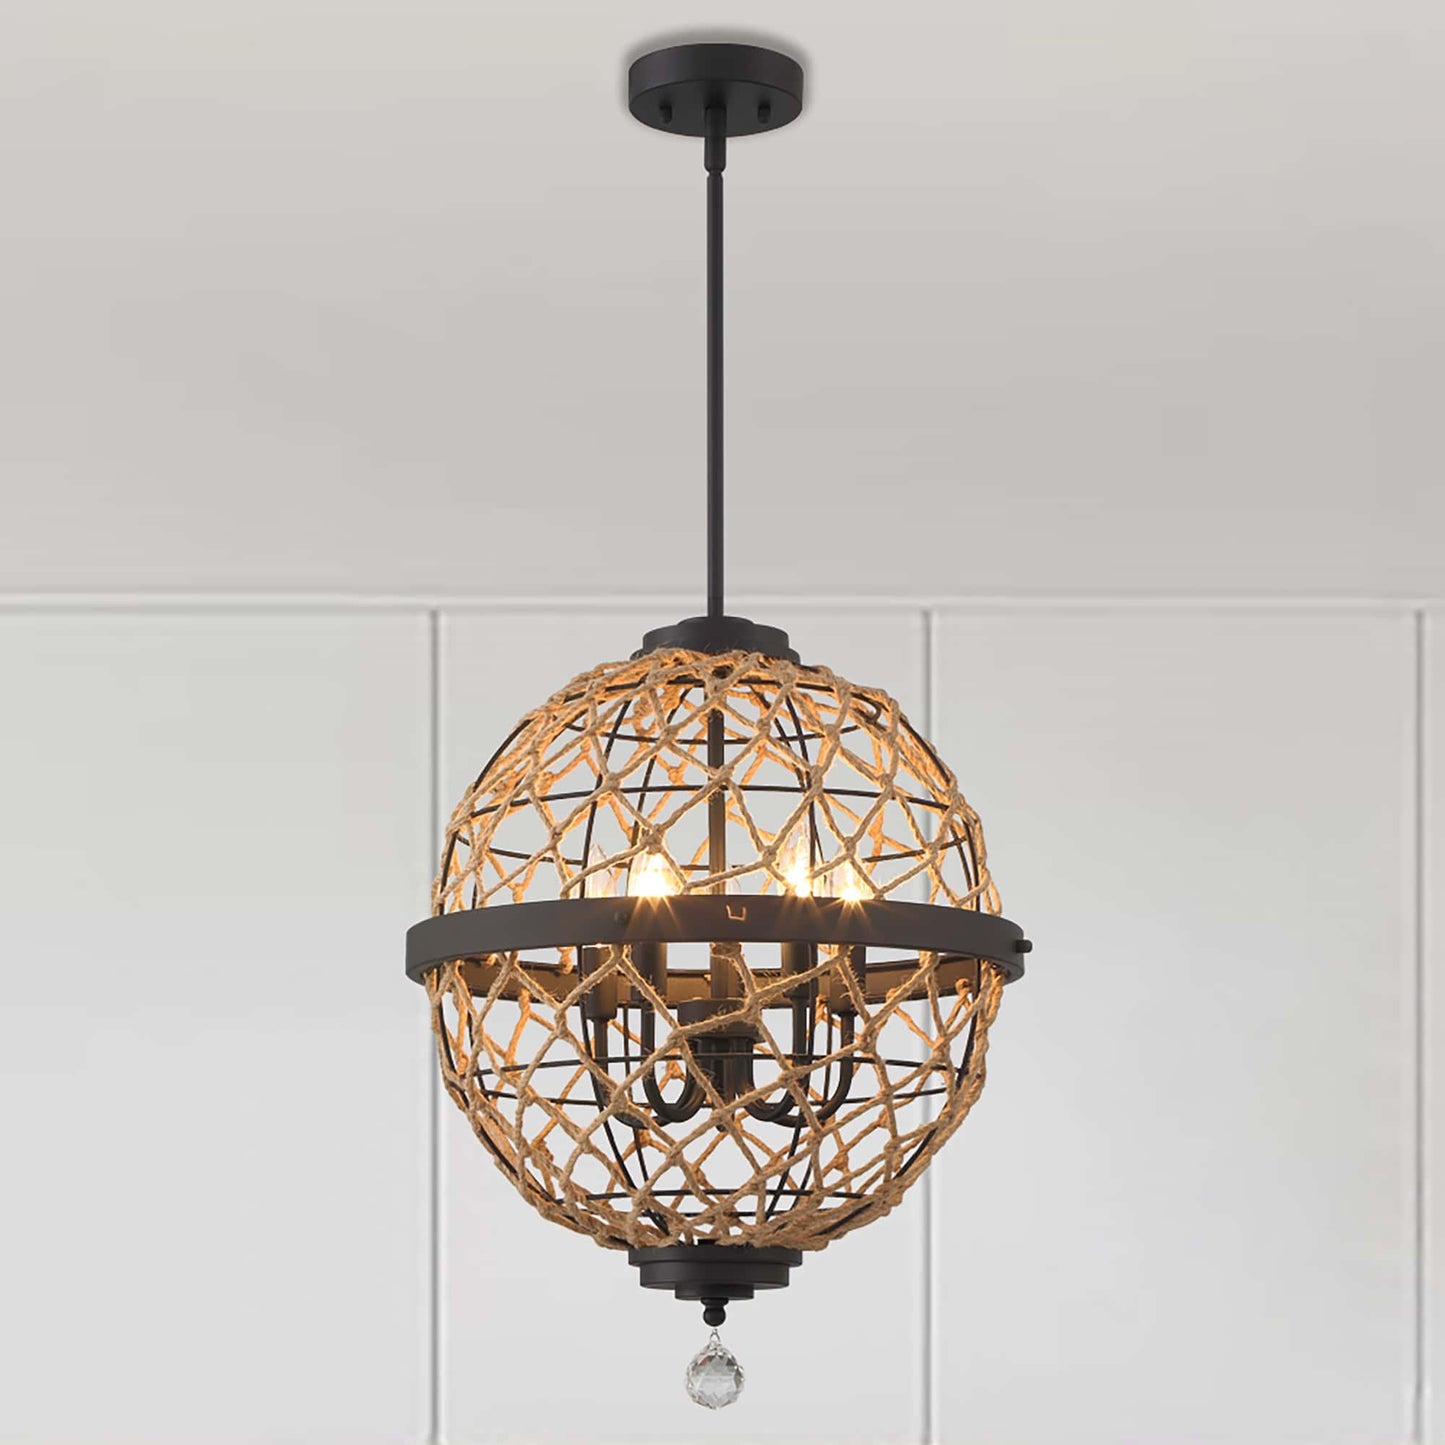 5 light sphere globe chandelier with rope accents (1) by ACROMA